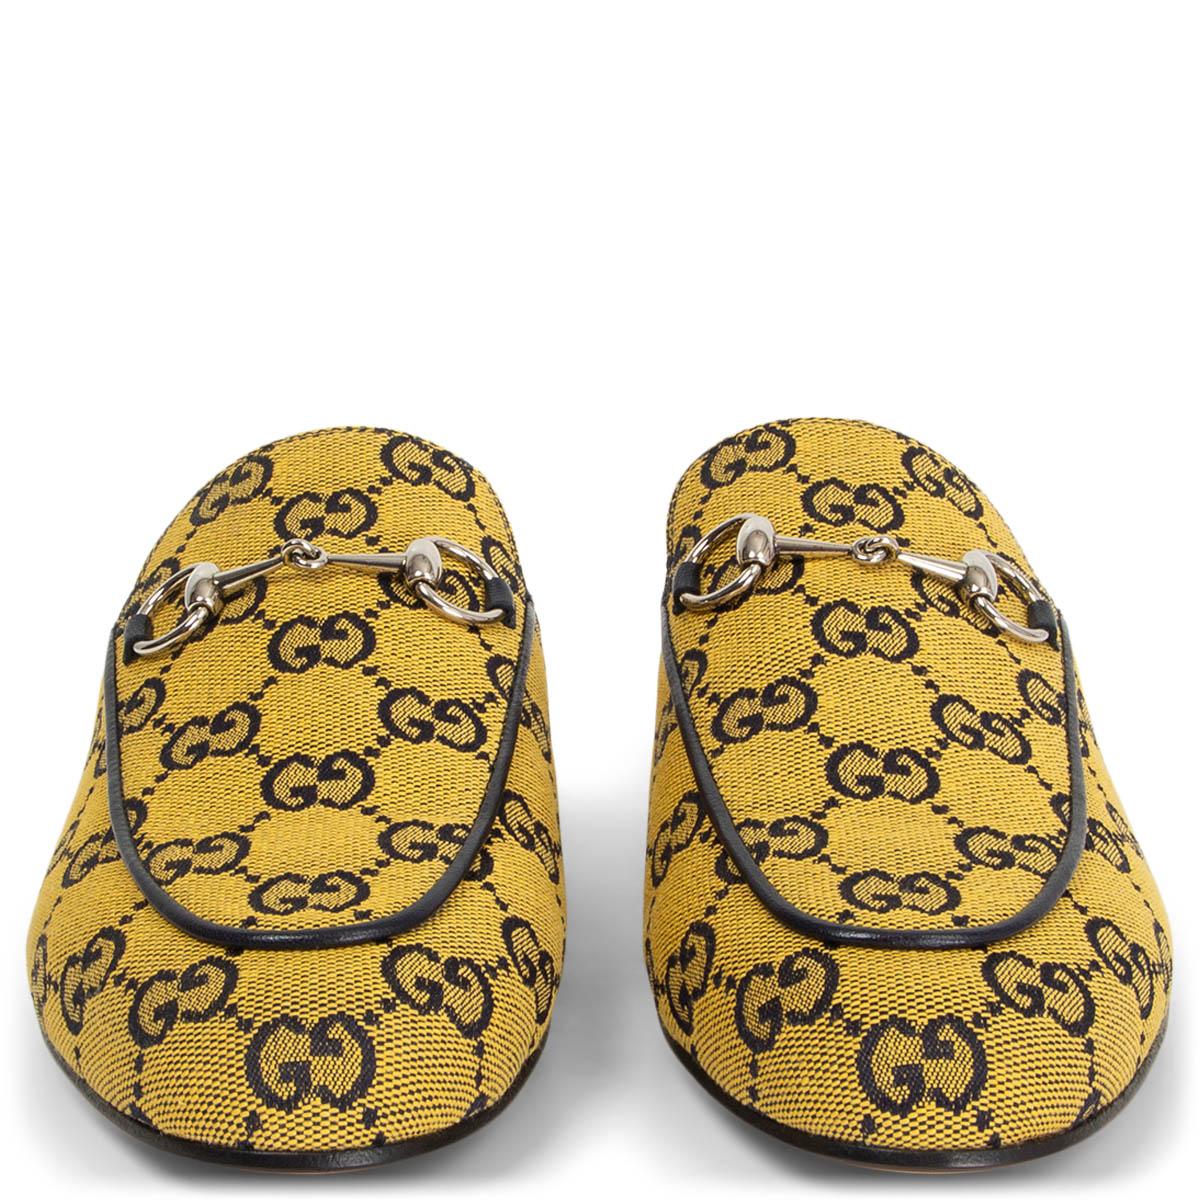 100% authentic Gucci GG Princetown slippers in yellow and black monogram canvas. Brand new. Come with dust bags. 

Measurements
Imprinted Size	38
Shoe Size	38
Inside Sole	25.5cm (9.9in)
Width	7.5cm (2.9in)
Heel	2cm (0.8in)

All our listings include